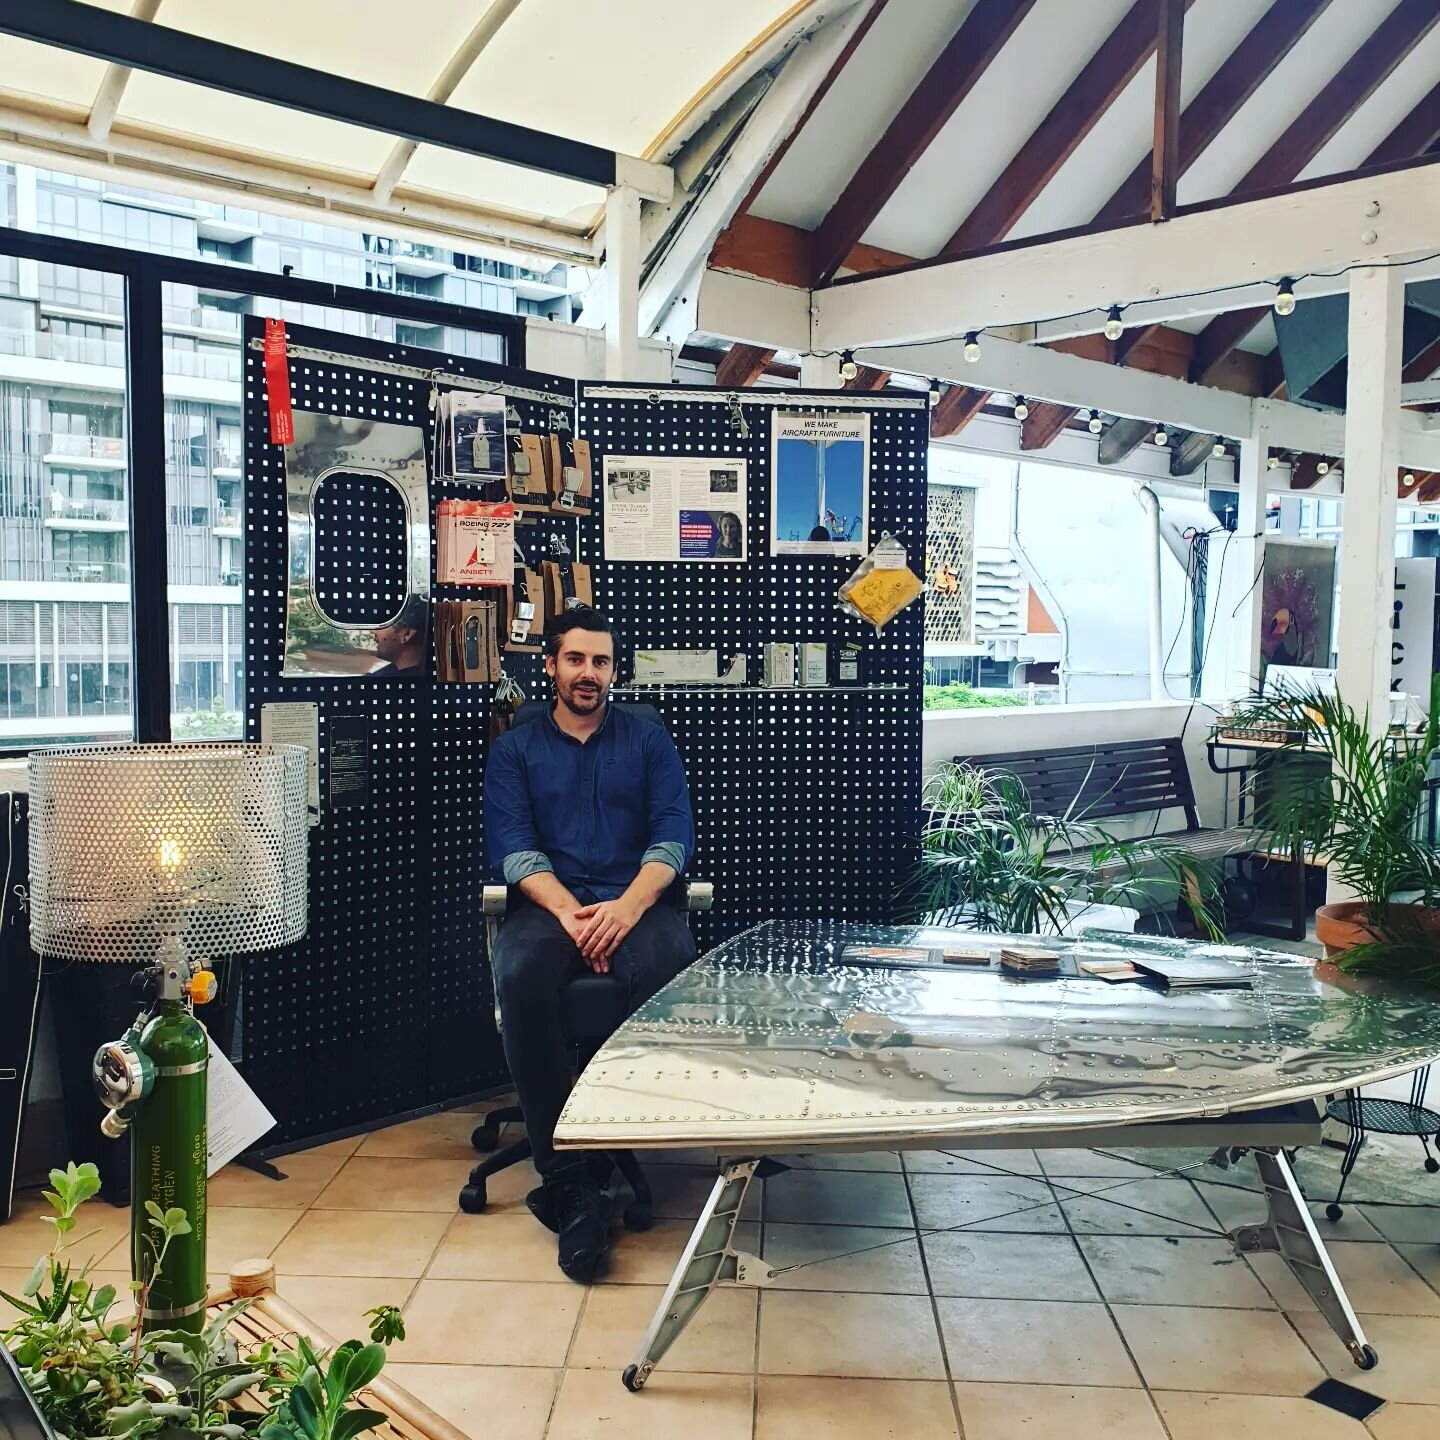 Got my stall set-up 3m from the bar! With my reclaimed aircraft table, bottle openers and other bits and pieces. Best spot. 

#sparrowlandshortfilmfestival #relicdesignandcraftco #aviationfurniture #aircraftfurniture #bespokefurniture #furnituredesig